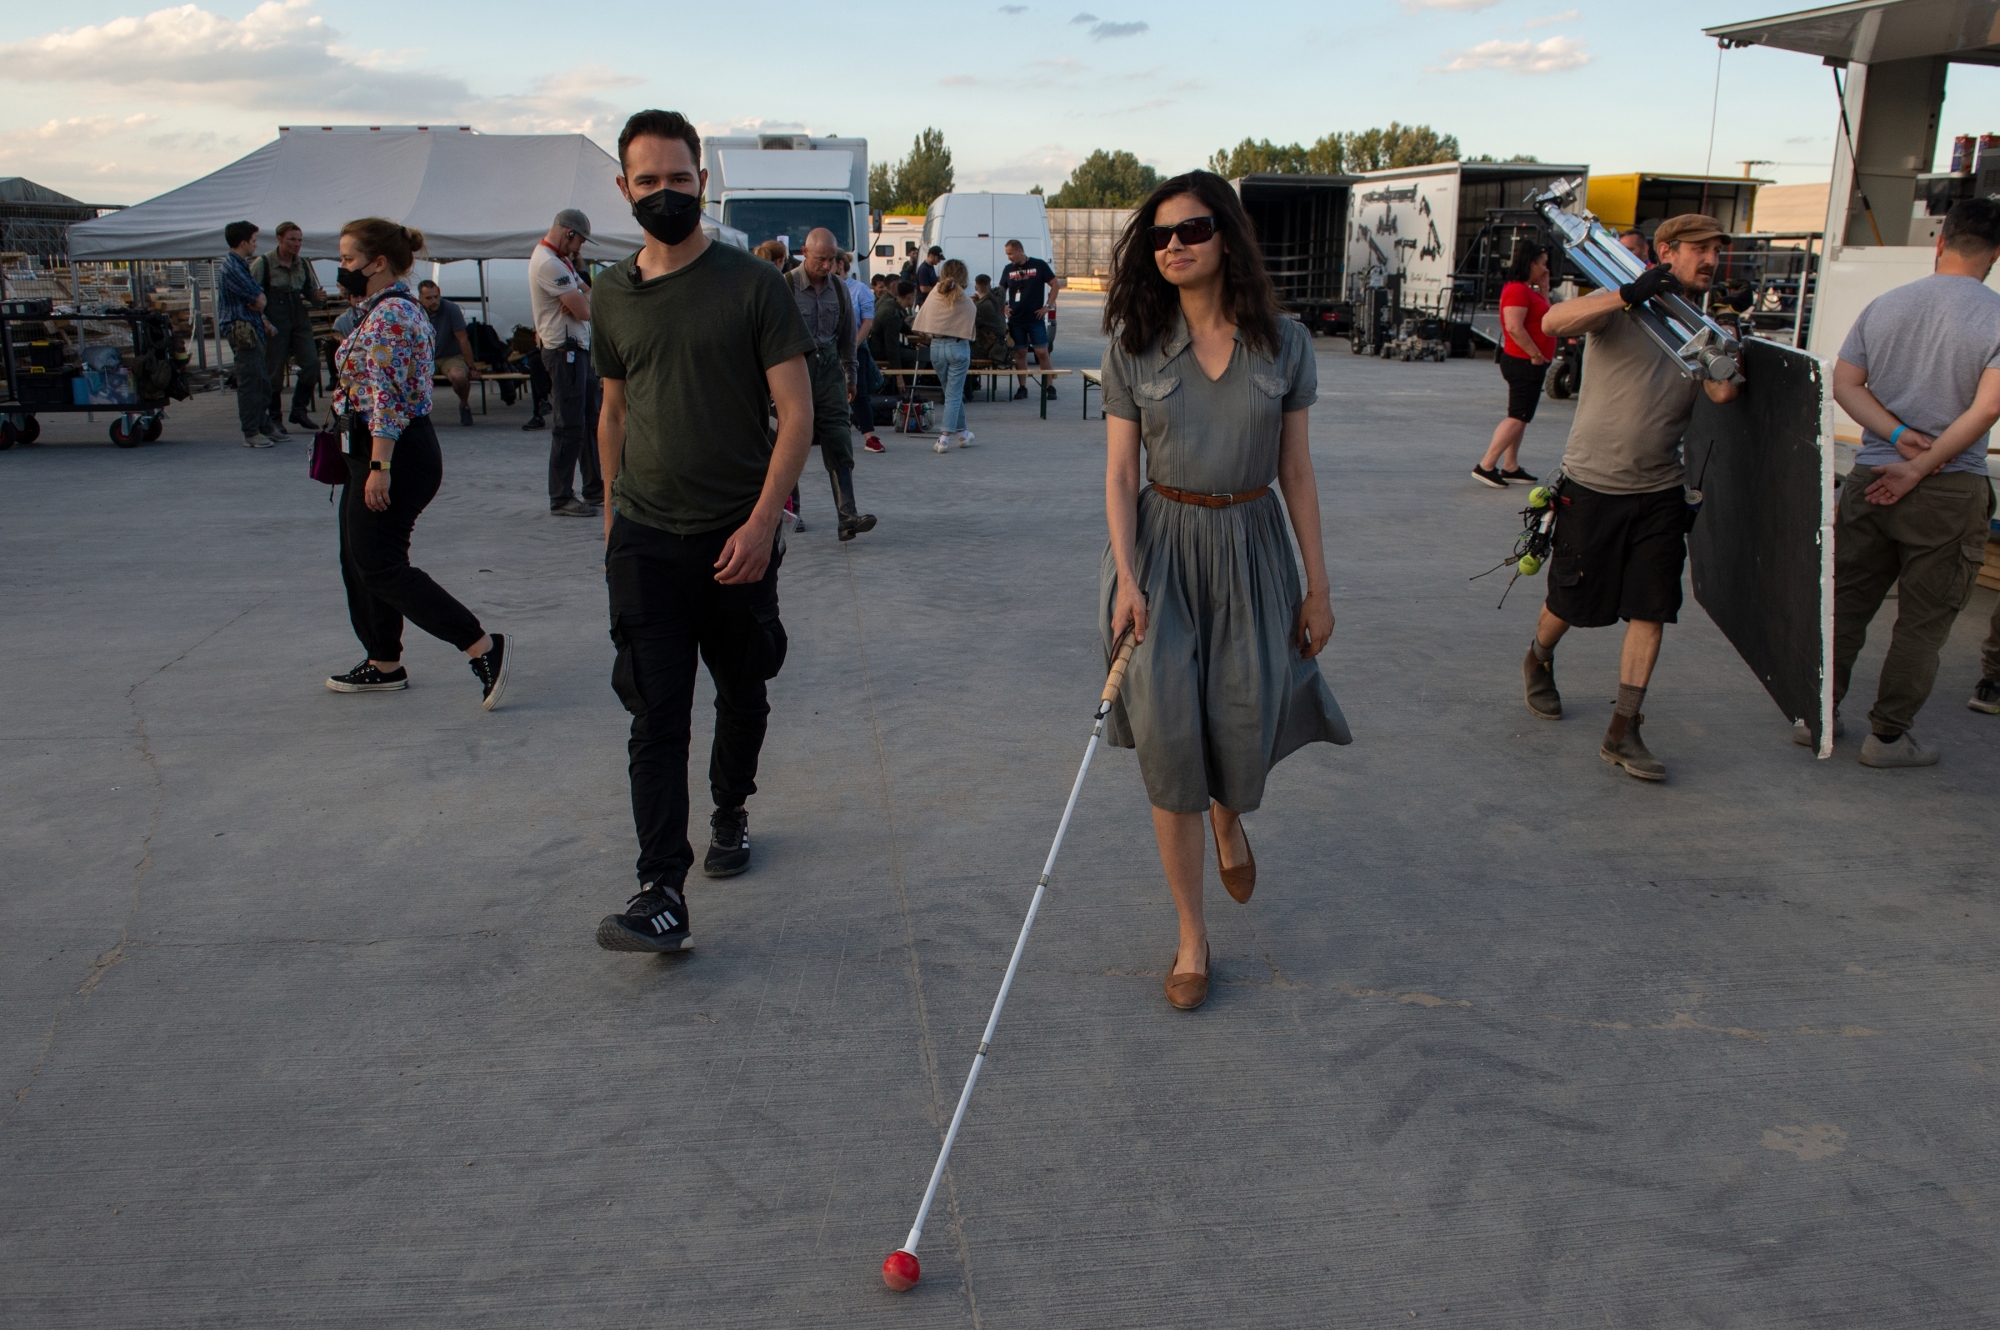 Loberti walks across a busy production set, wearing dark sunglasses and using a white cane.